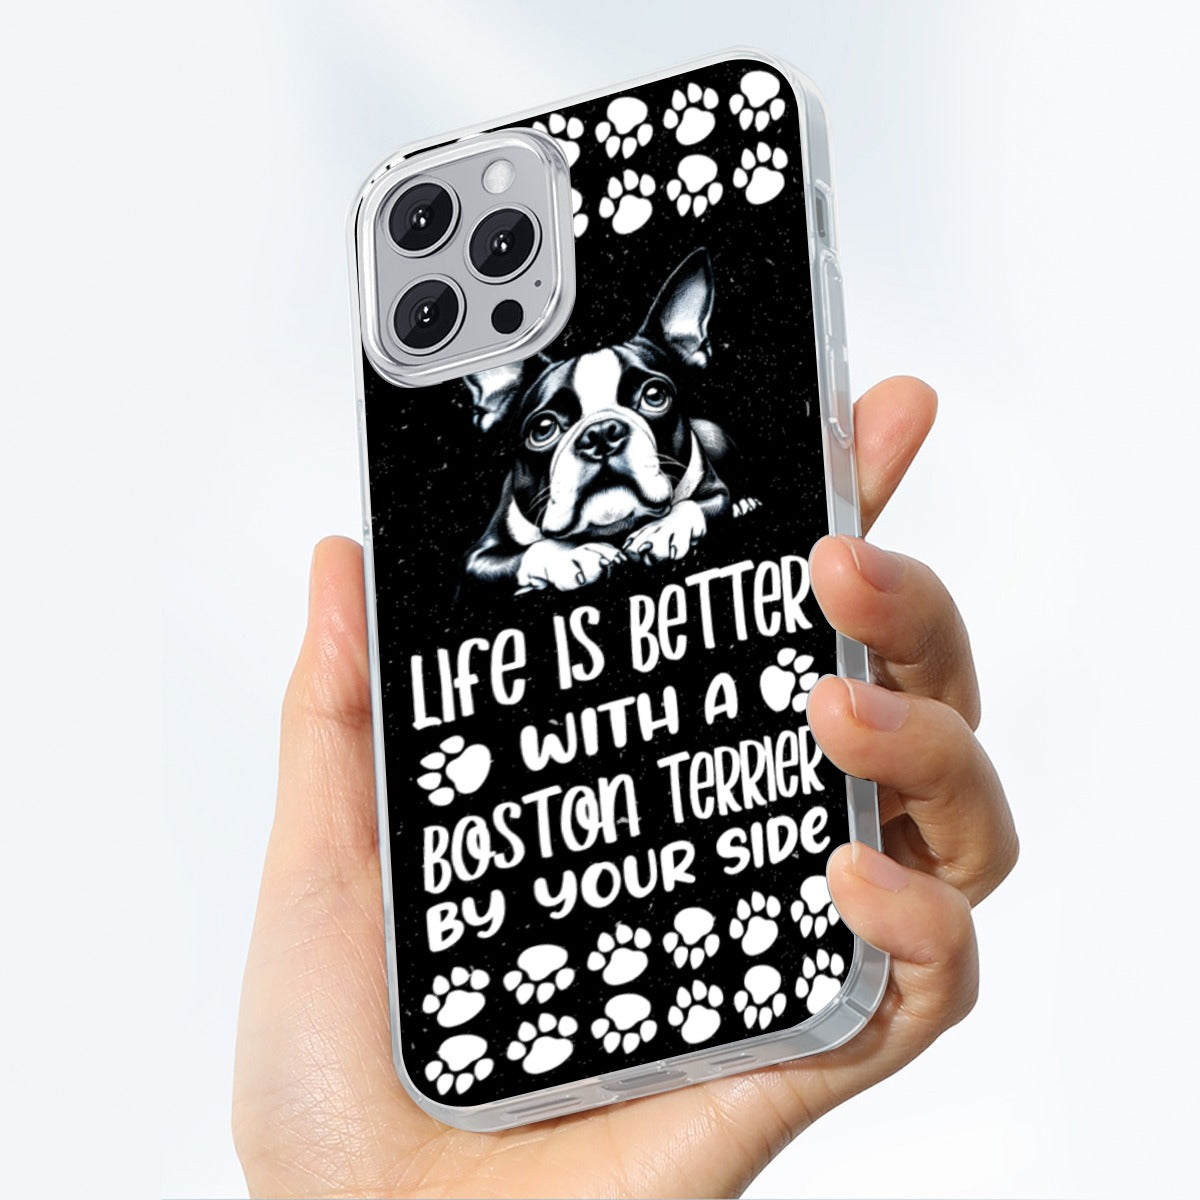 Tyson - iPhone case for Boston Terrier lovers